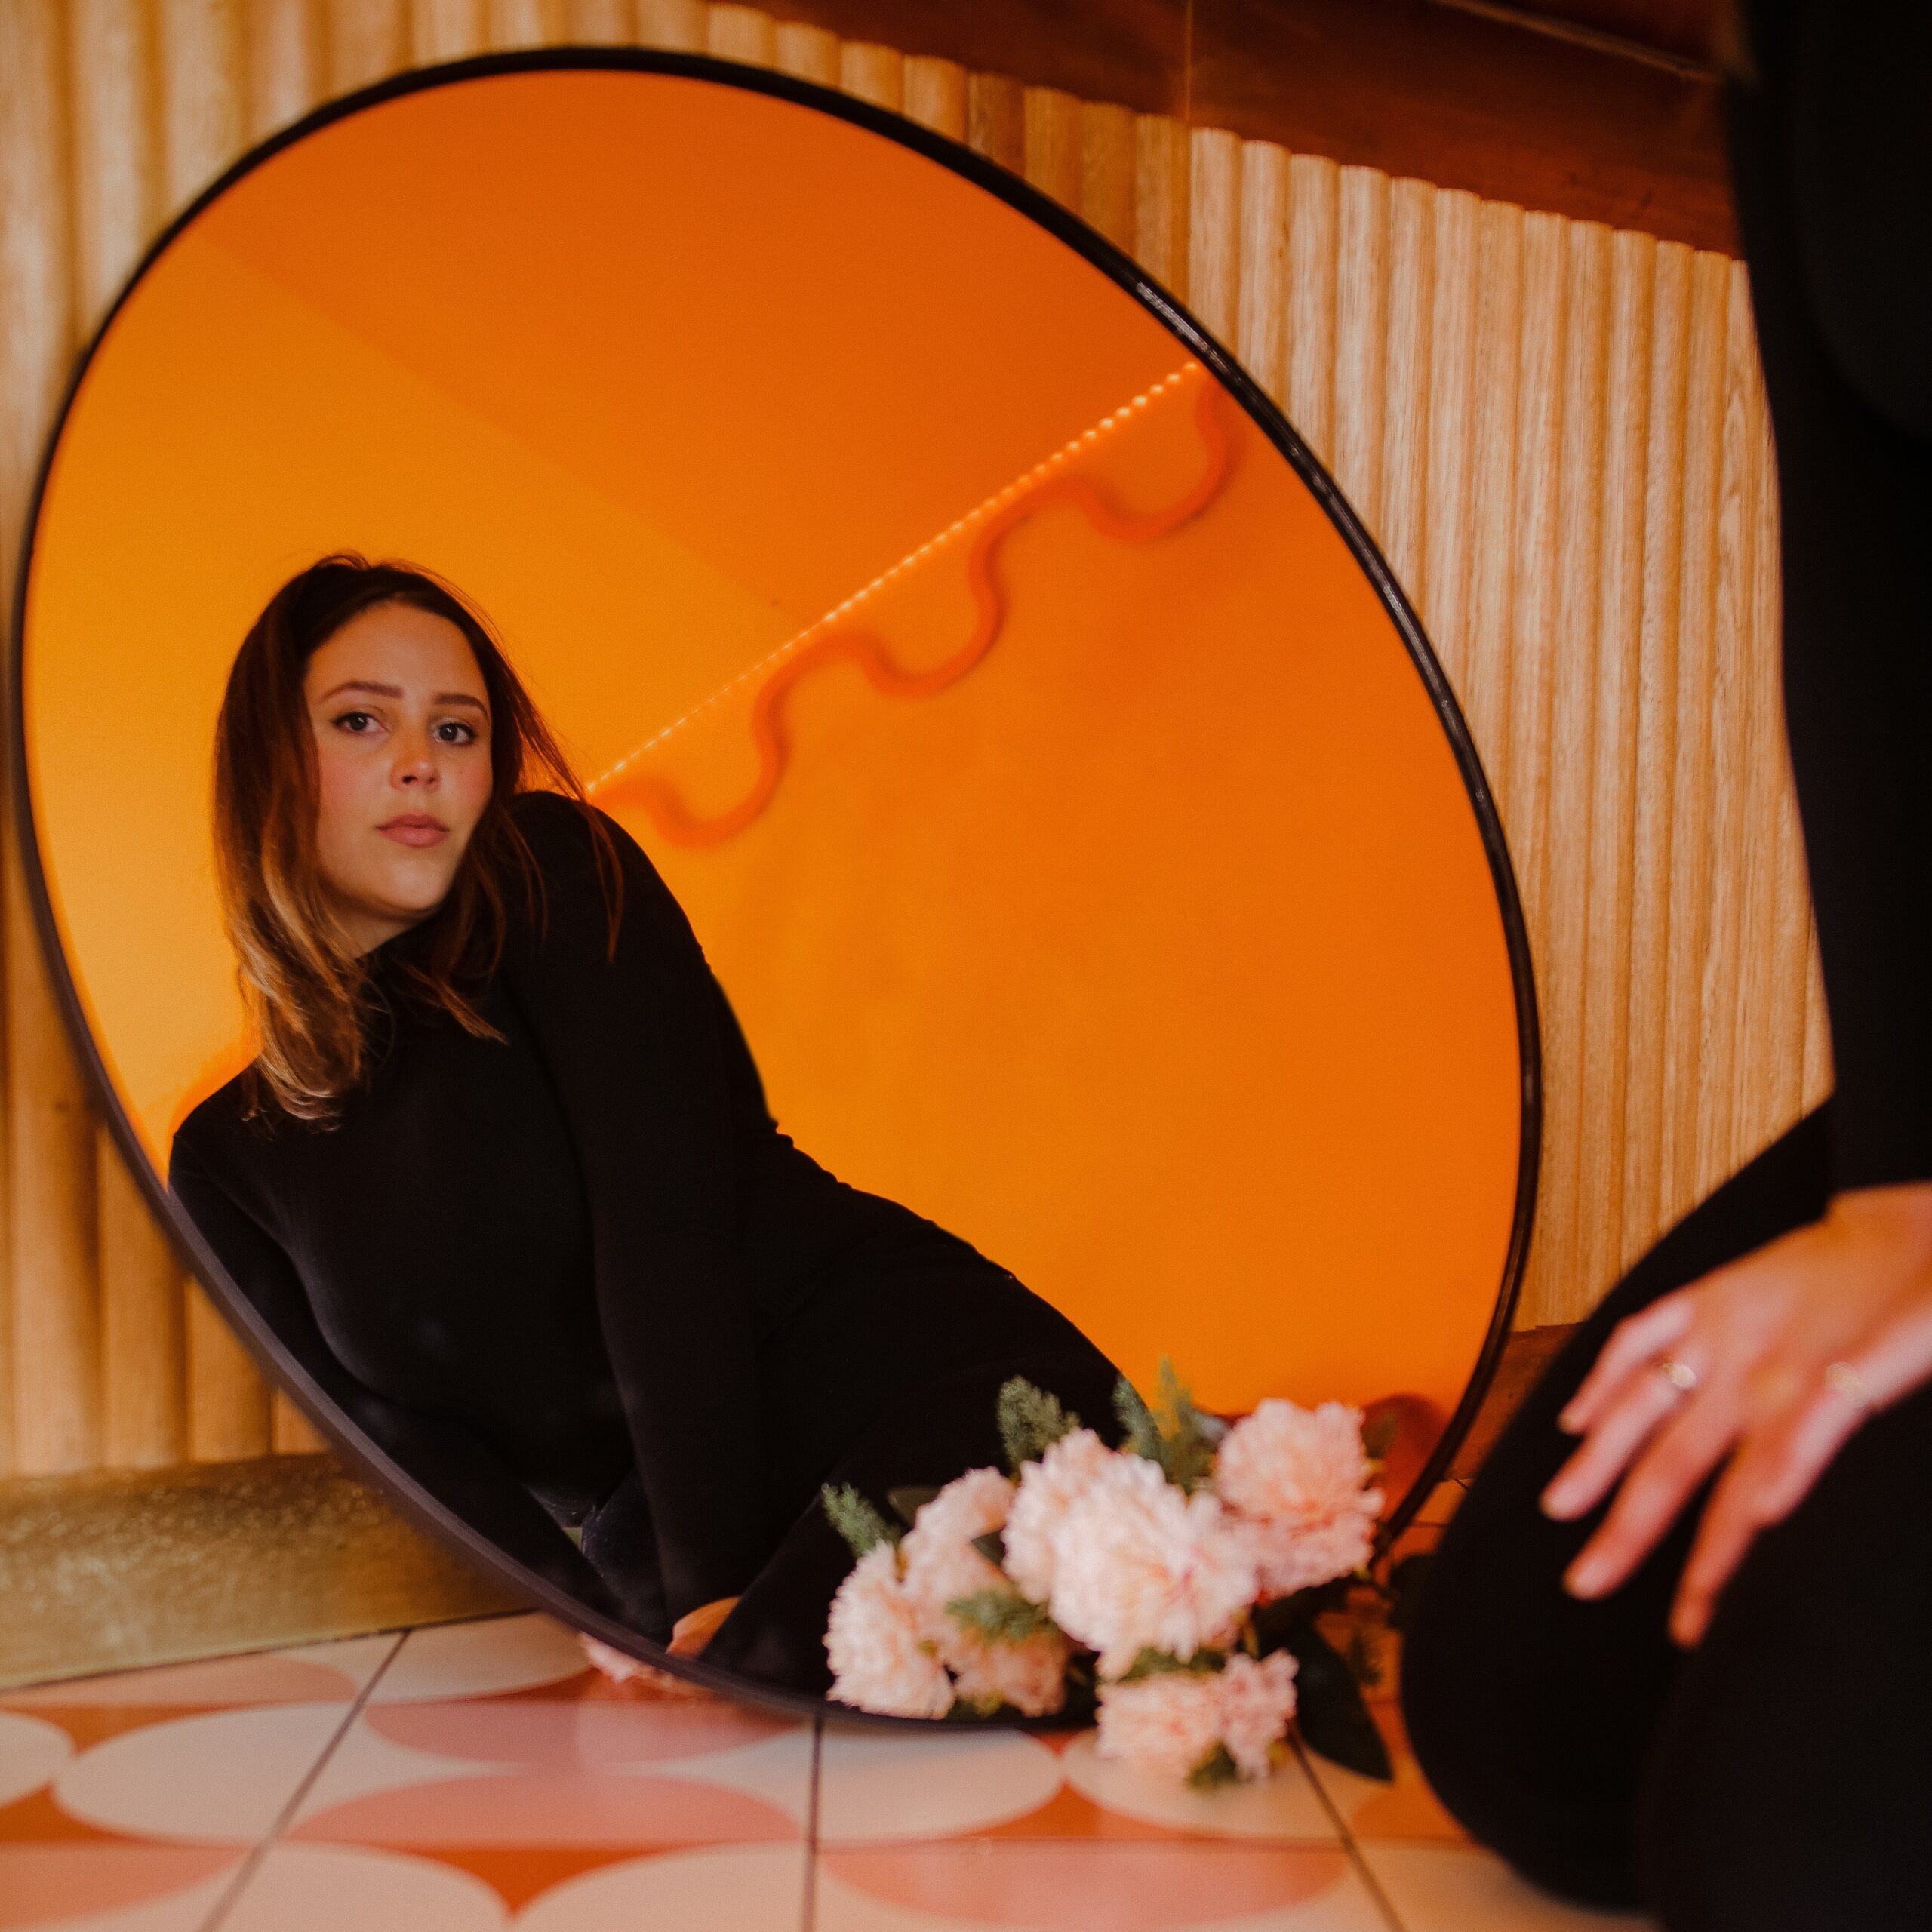 SHANNEN JAMES ANNOUNCES DEBUT EP ARROWS – OUT FRIDAY 25 SEPTEMBER